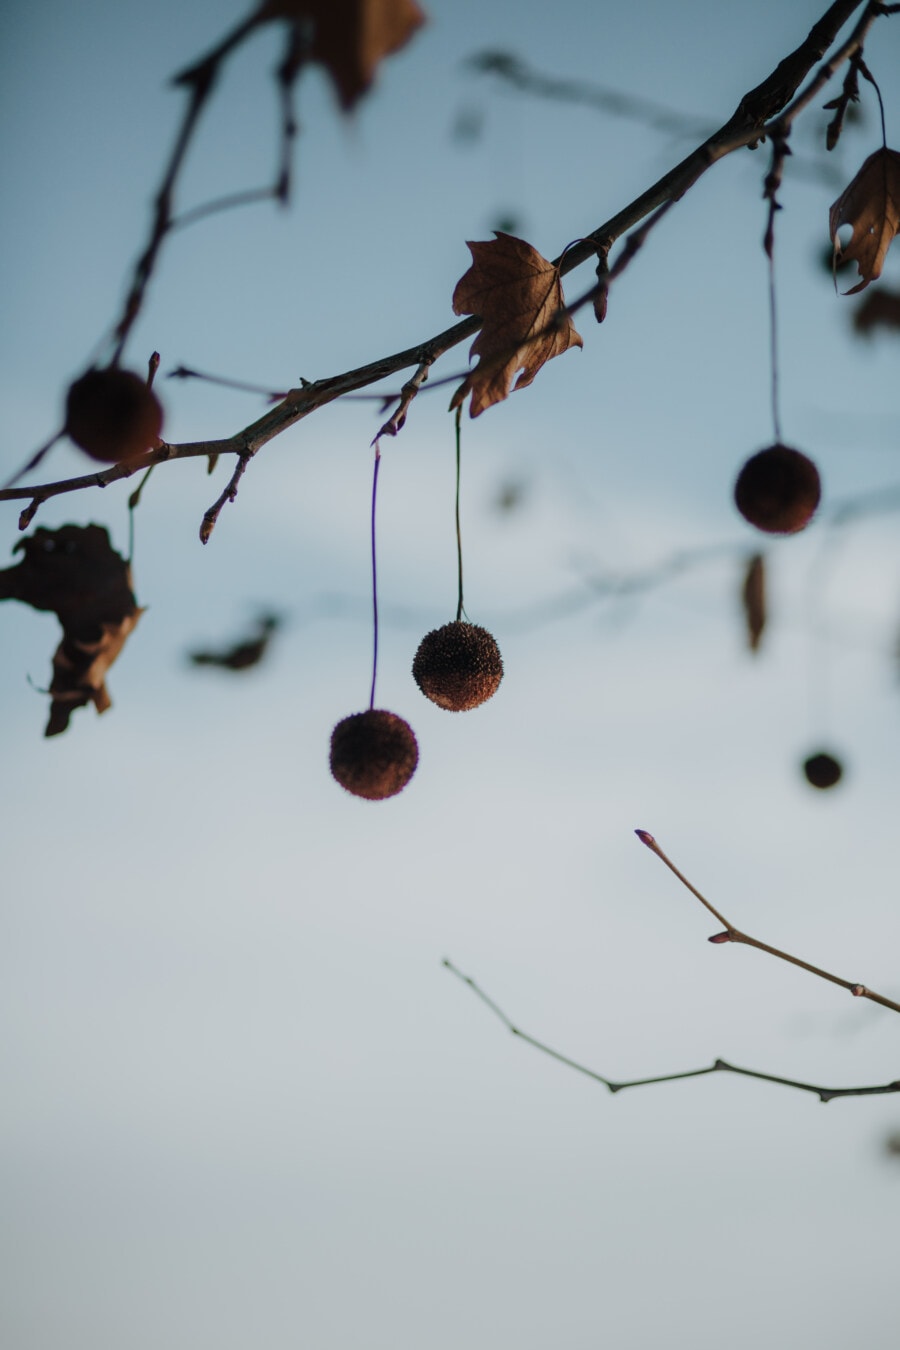 seed, hanging, autumn season, branchlet, leaf, dry season, tree, nature, branch, outdoors